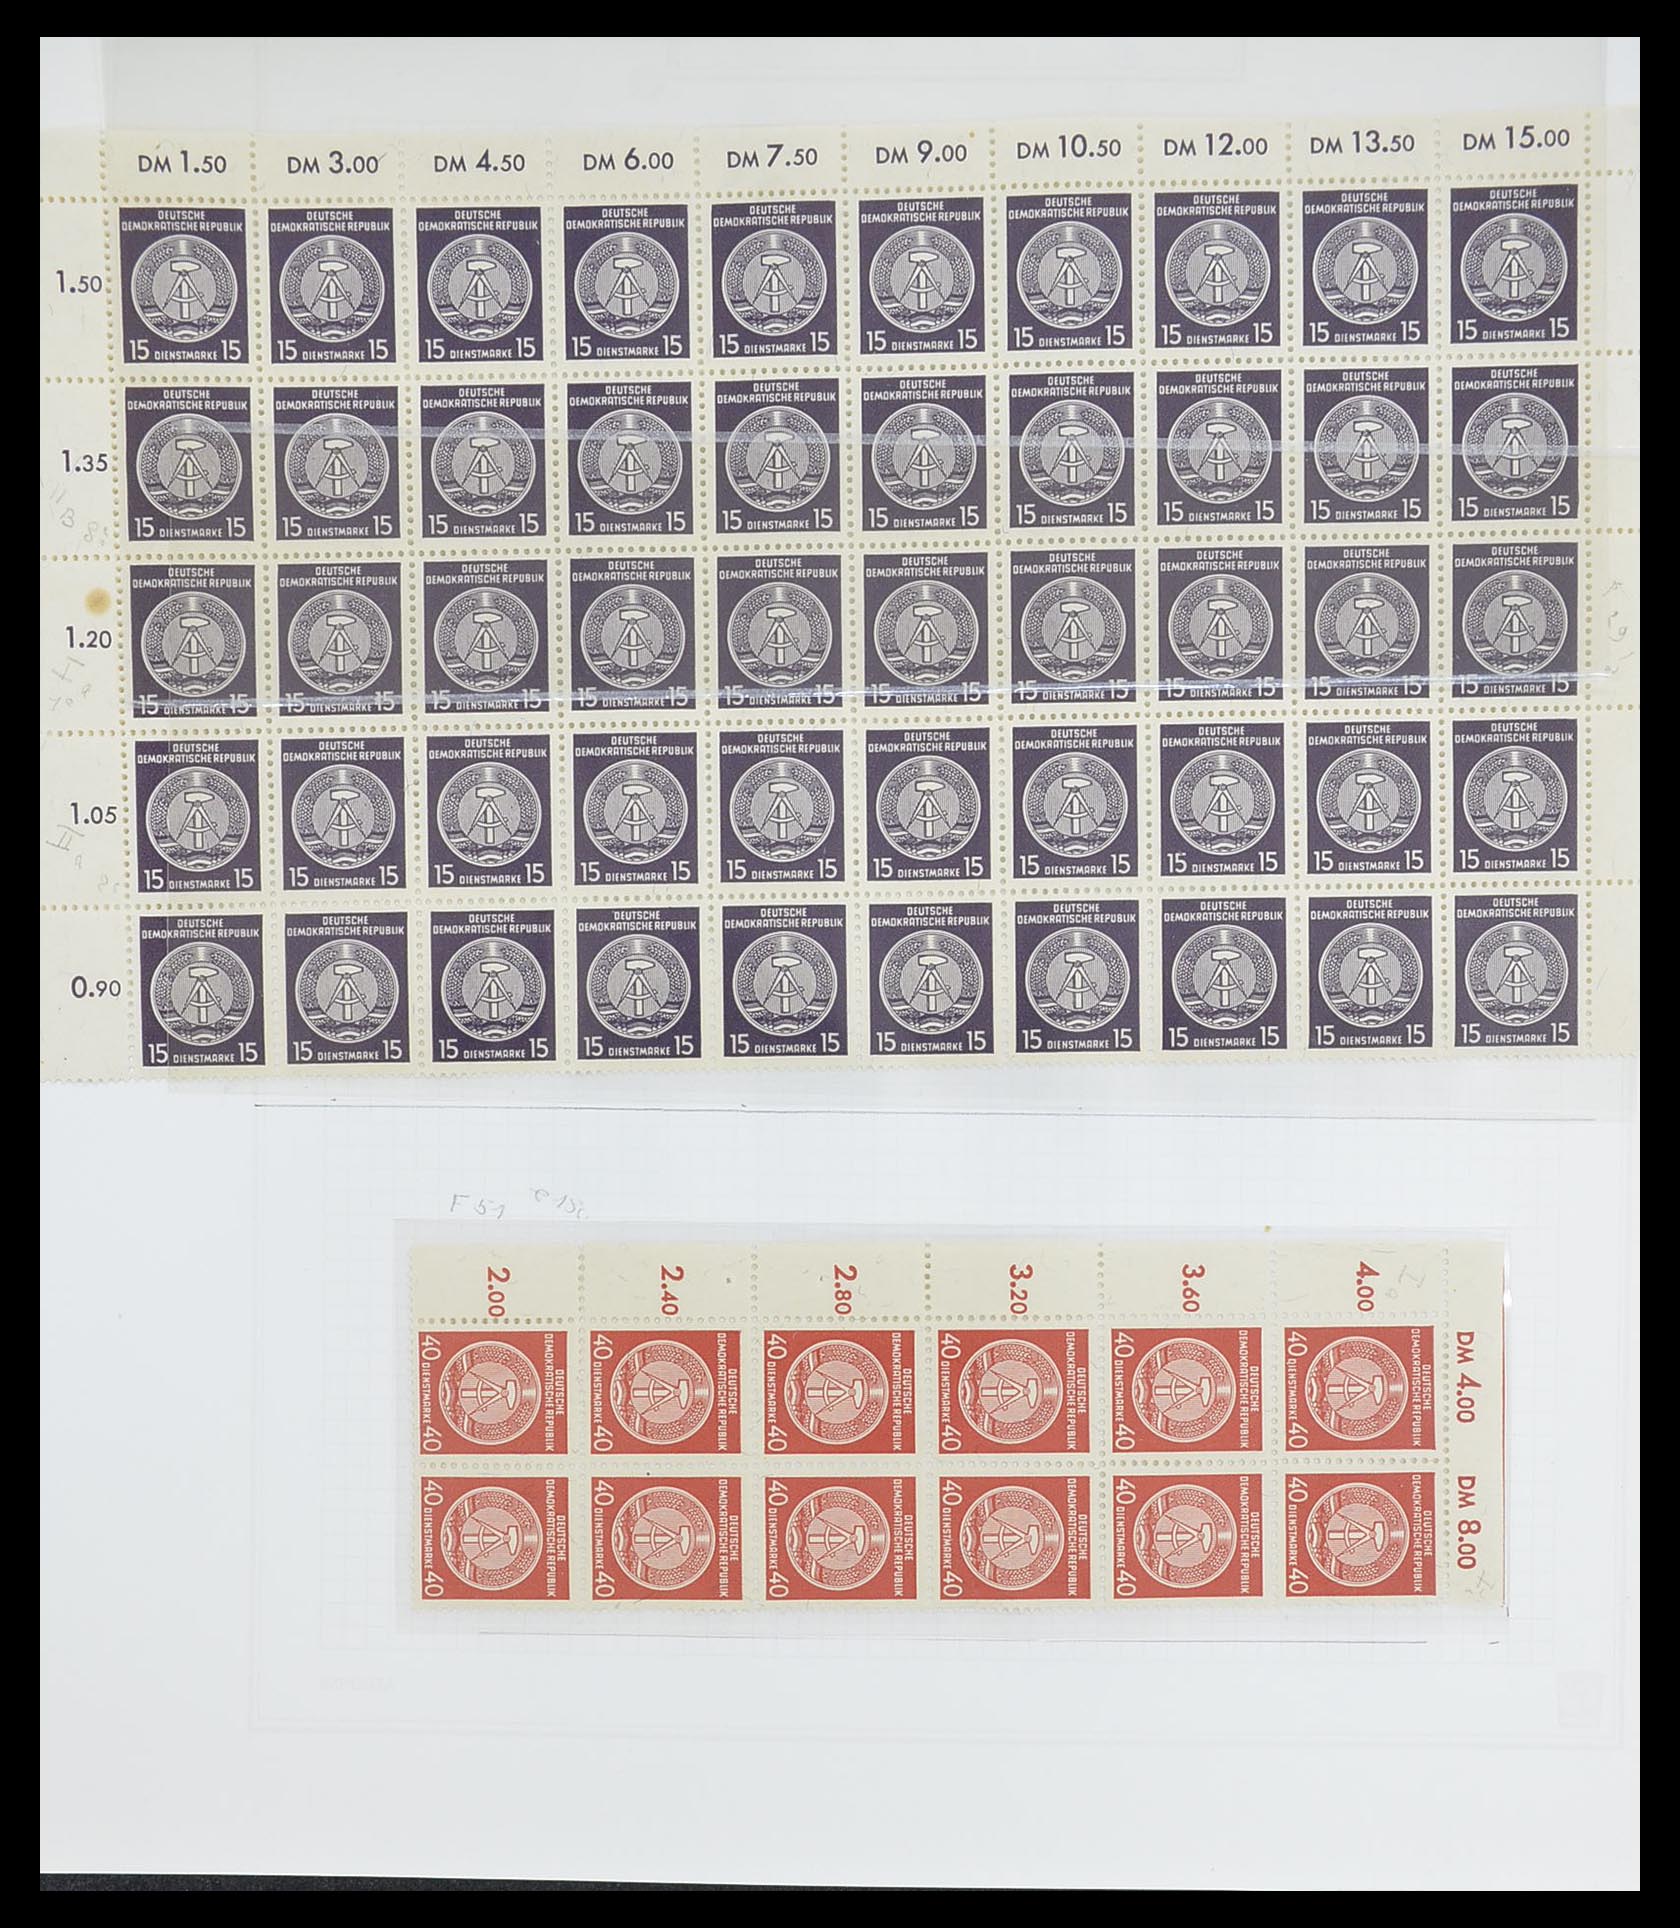 33821 072 - Stamp collection 33821 DDR service.